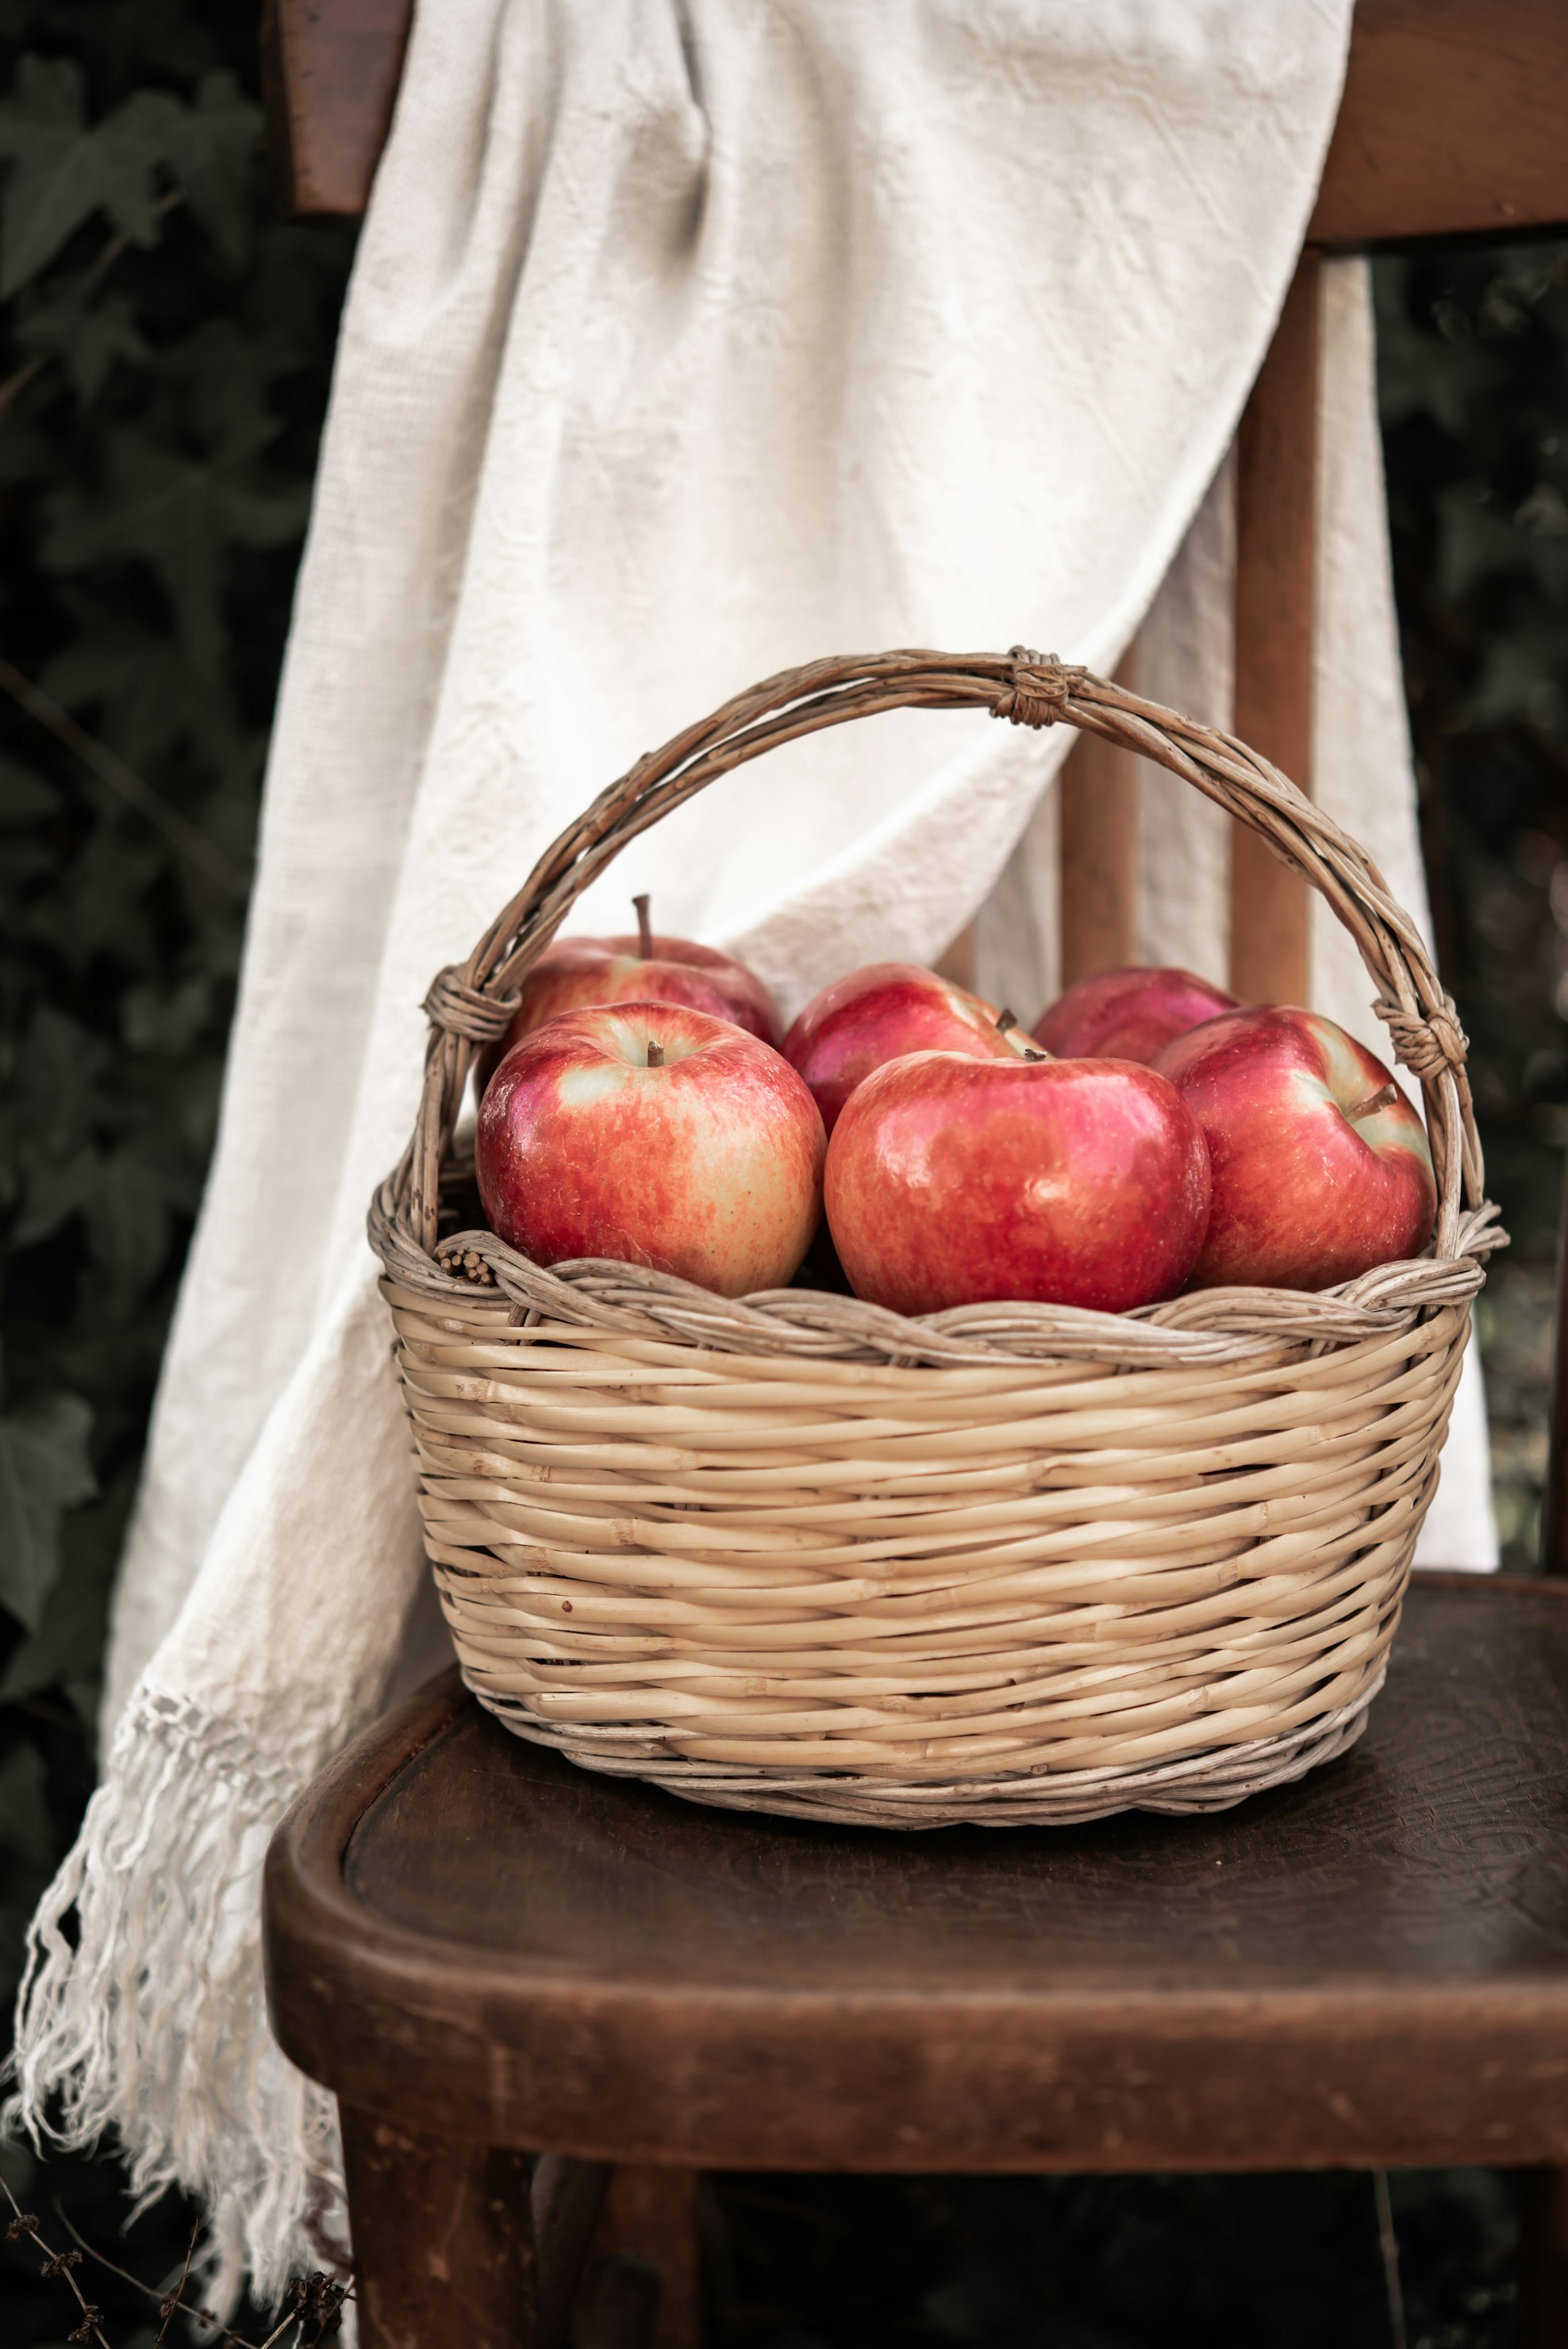 Basket of apples Christmas gift in china